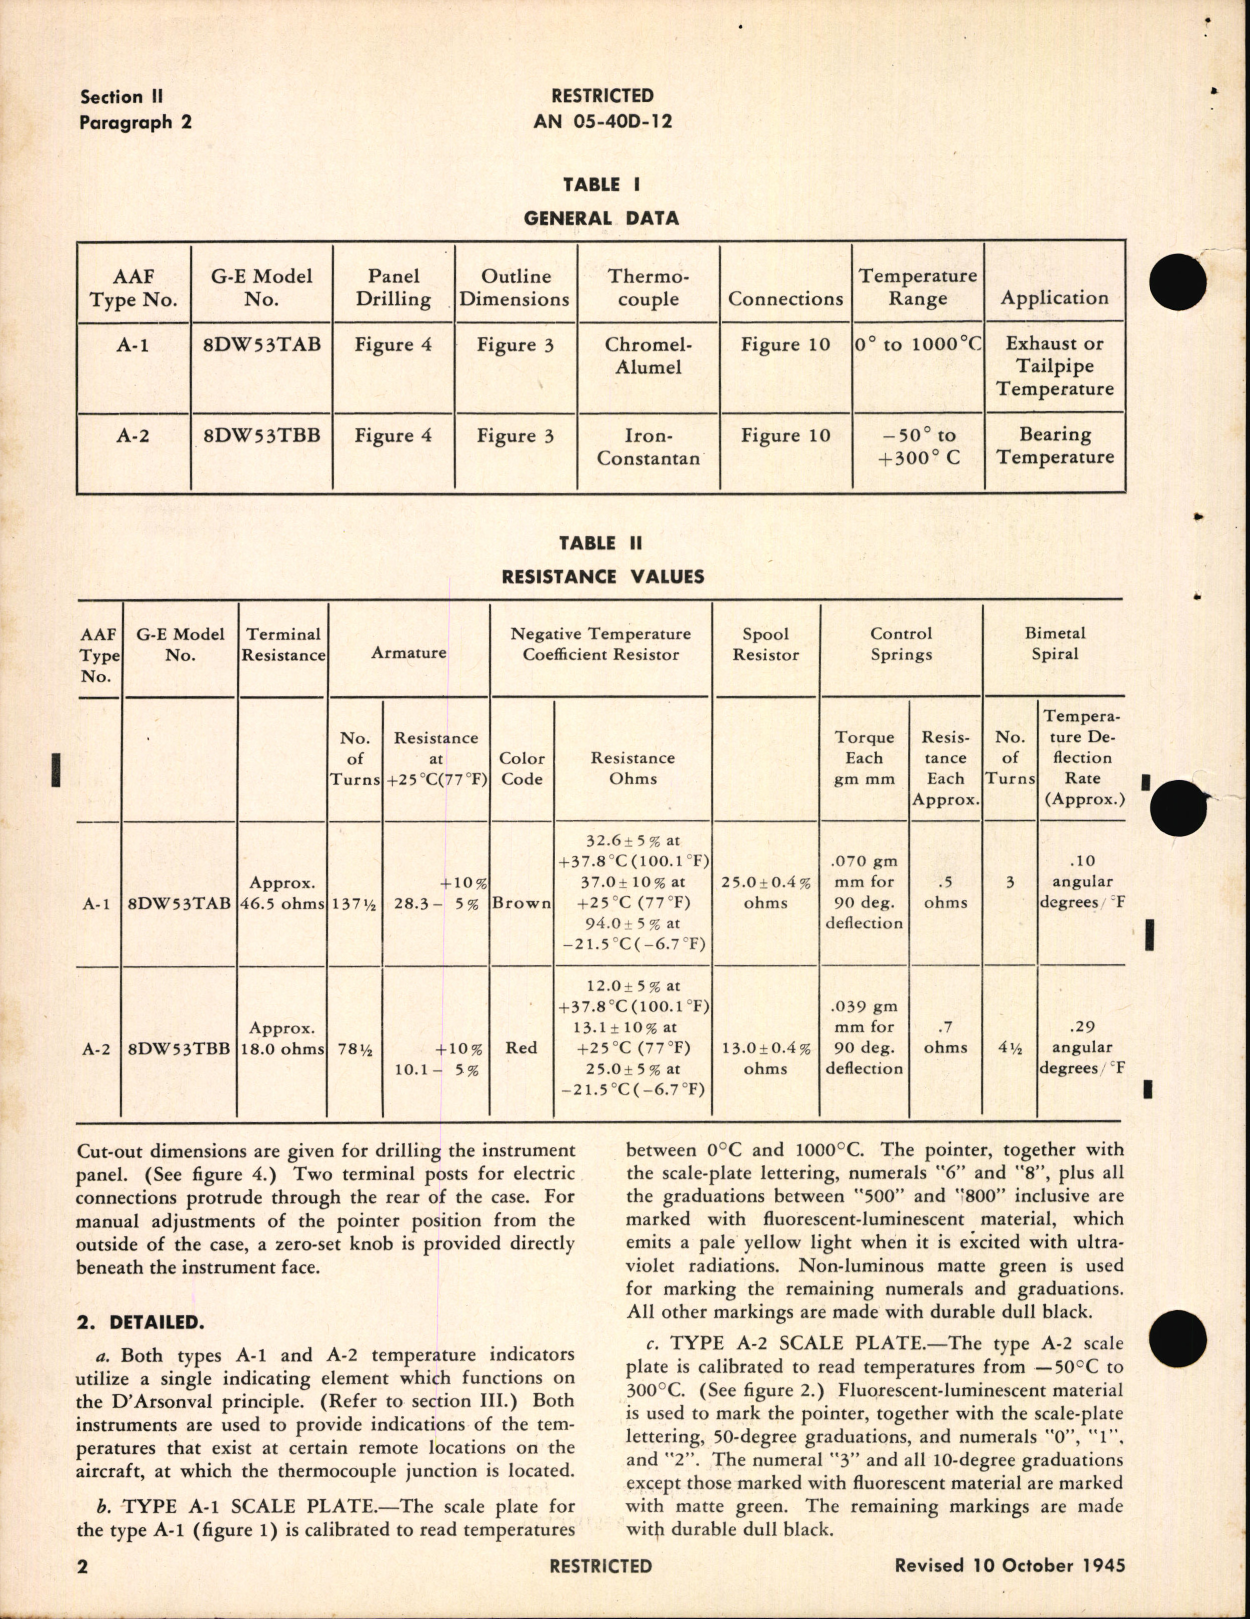 Sample page 8 from AirCorps Library document: Overhaul Instructions with Parts Catalog for Temperature Indicators Types A-1 and A-2